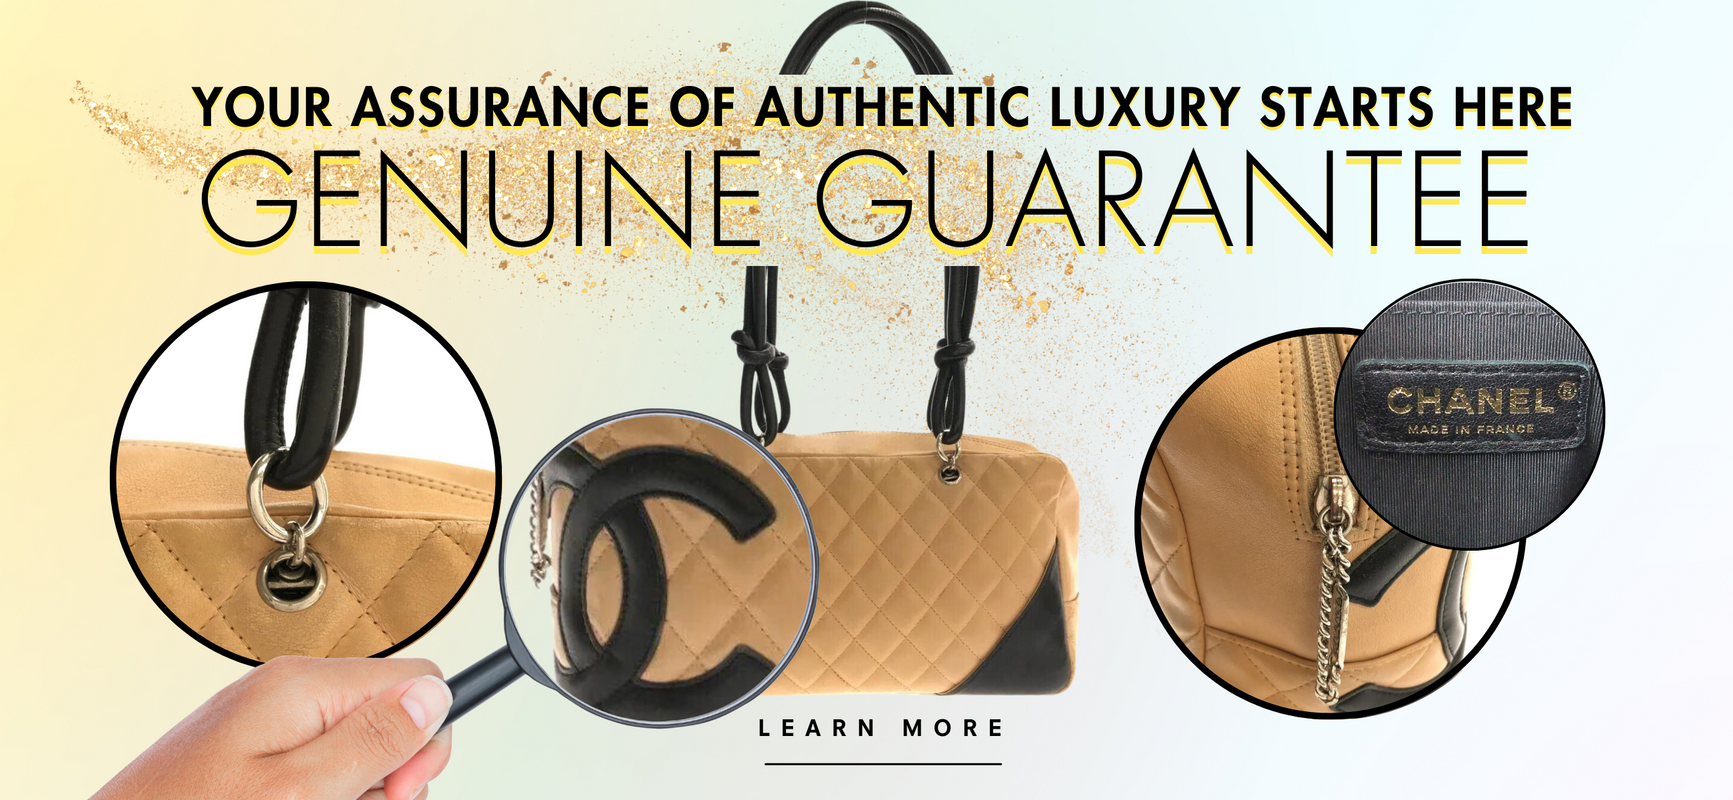 Authentic Louis Vuitton, Chanel luxury bags accessories and more